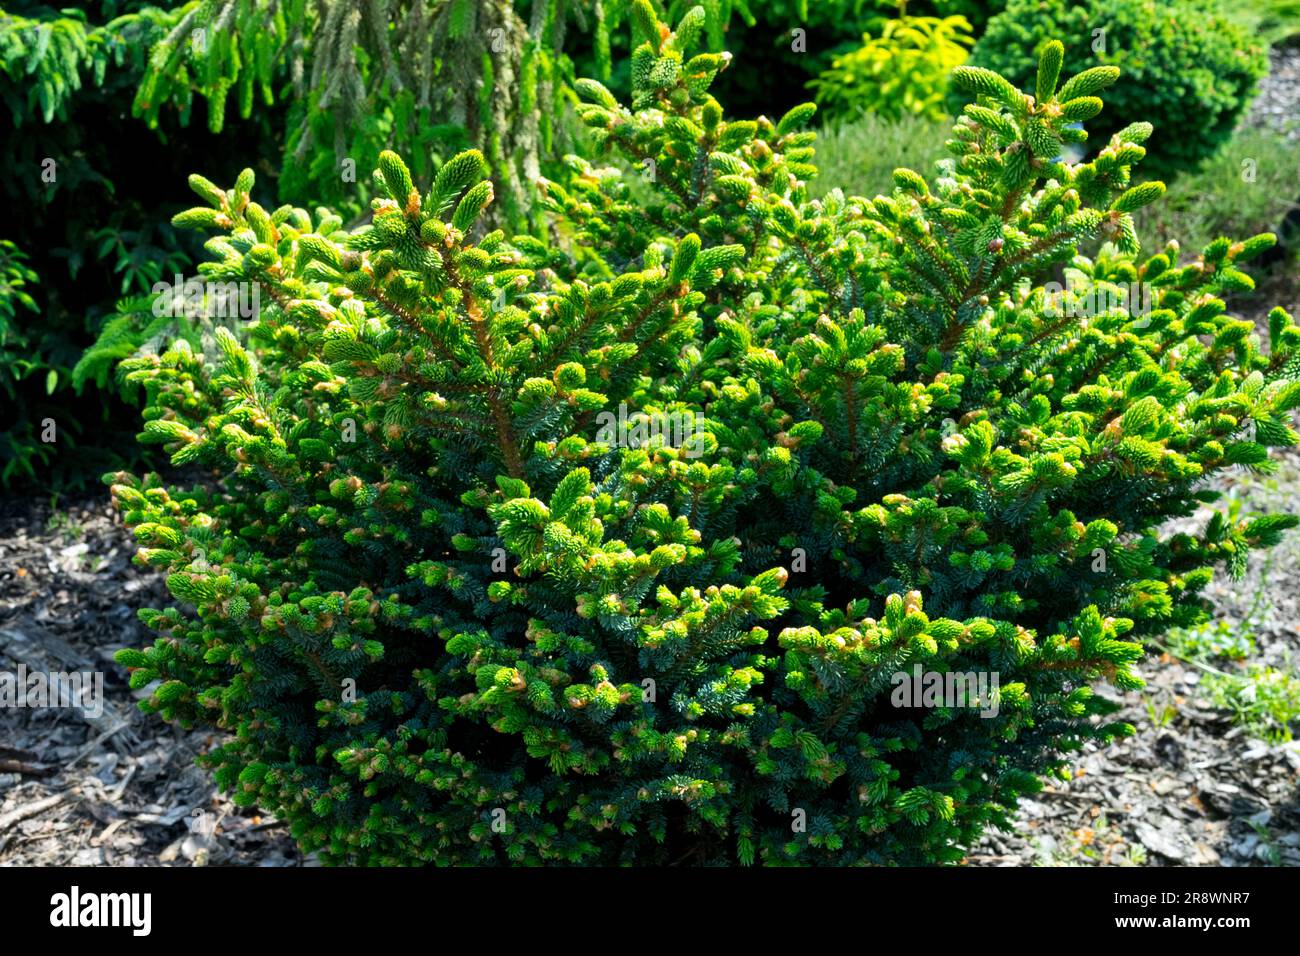 Yezo Spruce, Picea jezoensis 'Chinese Marl' Hondo Spruce slow-growing, compact plant in a garden Stock Photo